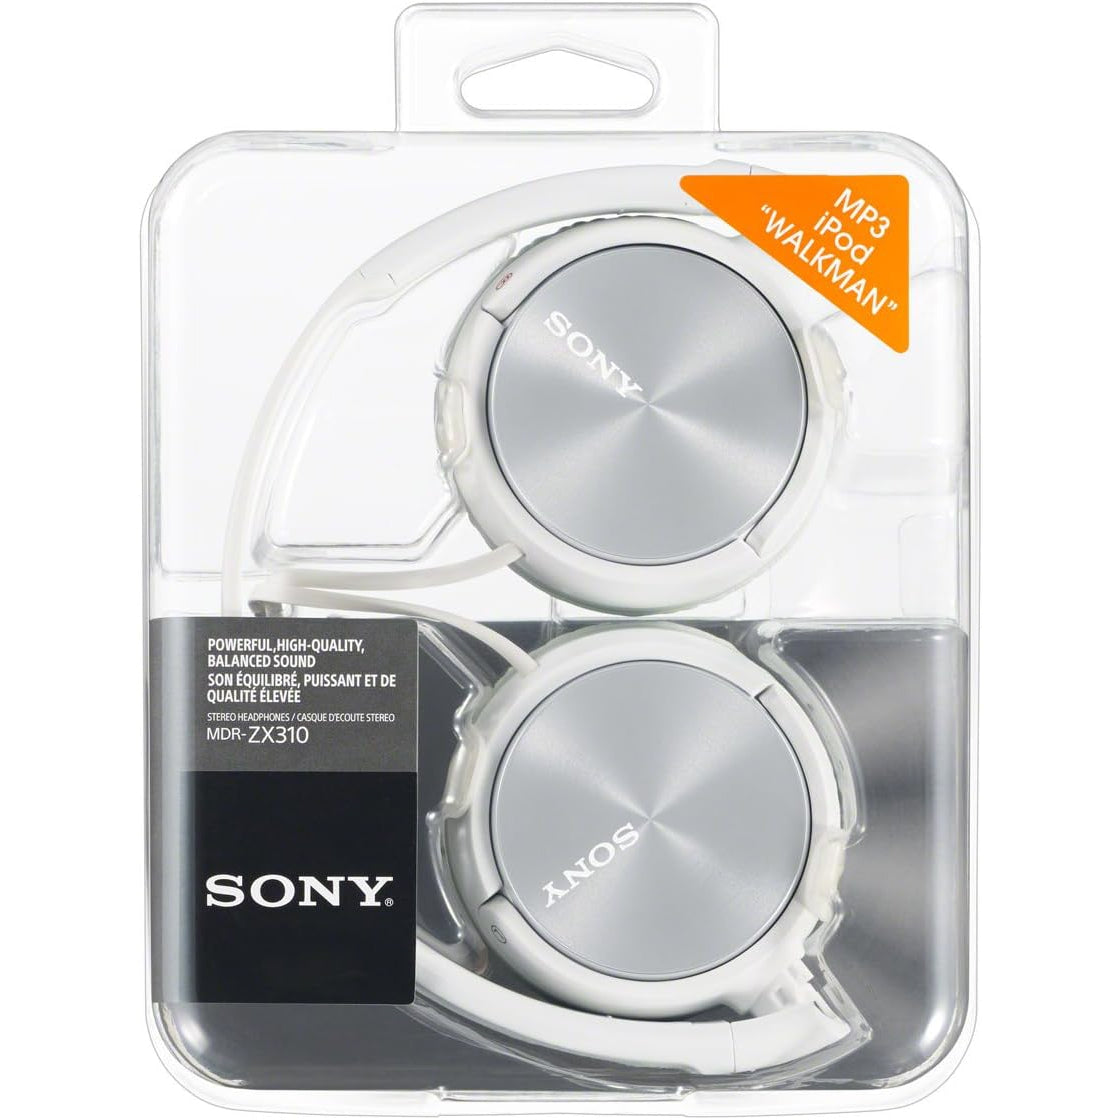 Sony MDR-ZX310AP Foldable Wired Headphones - White - Refurbished Good